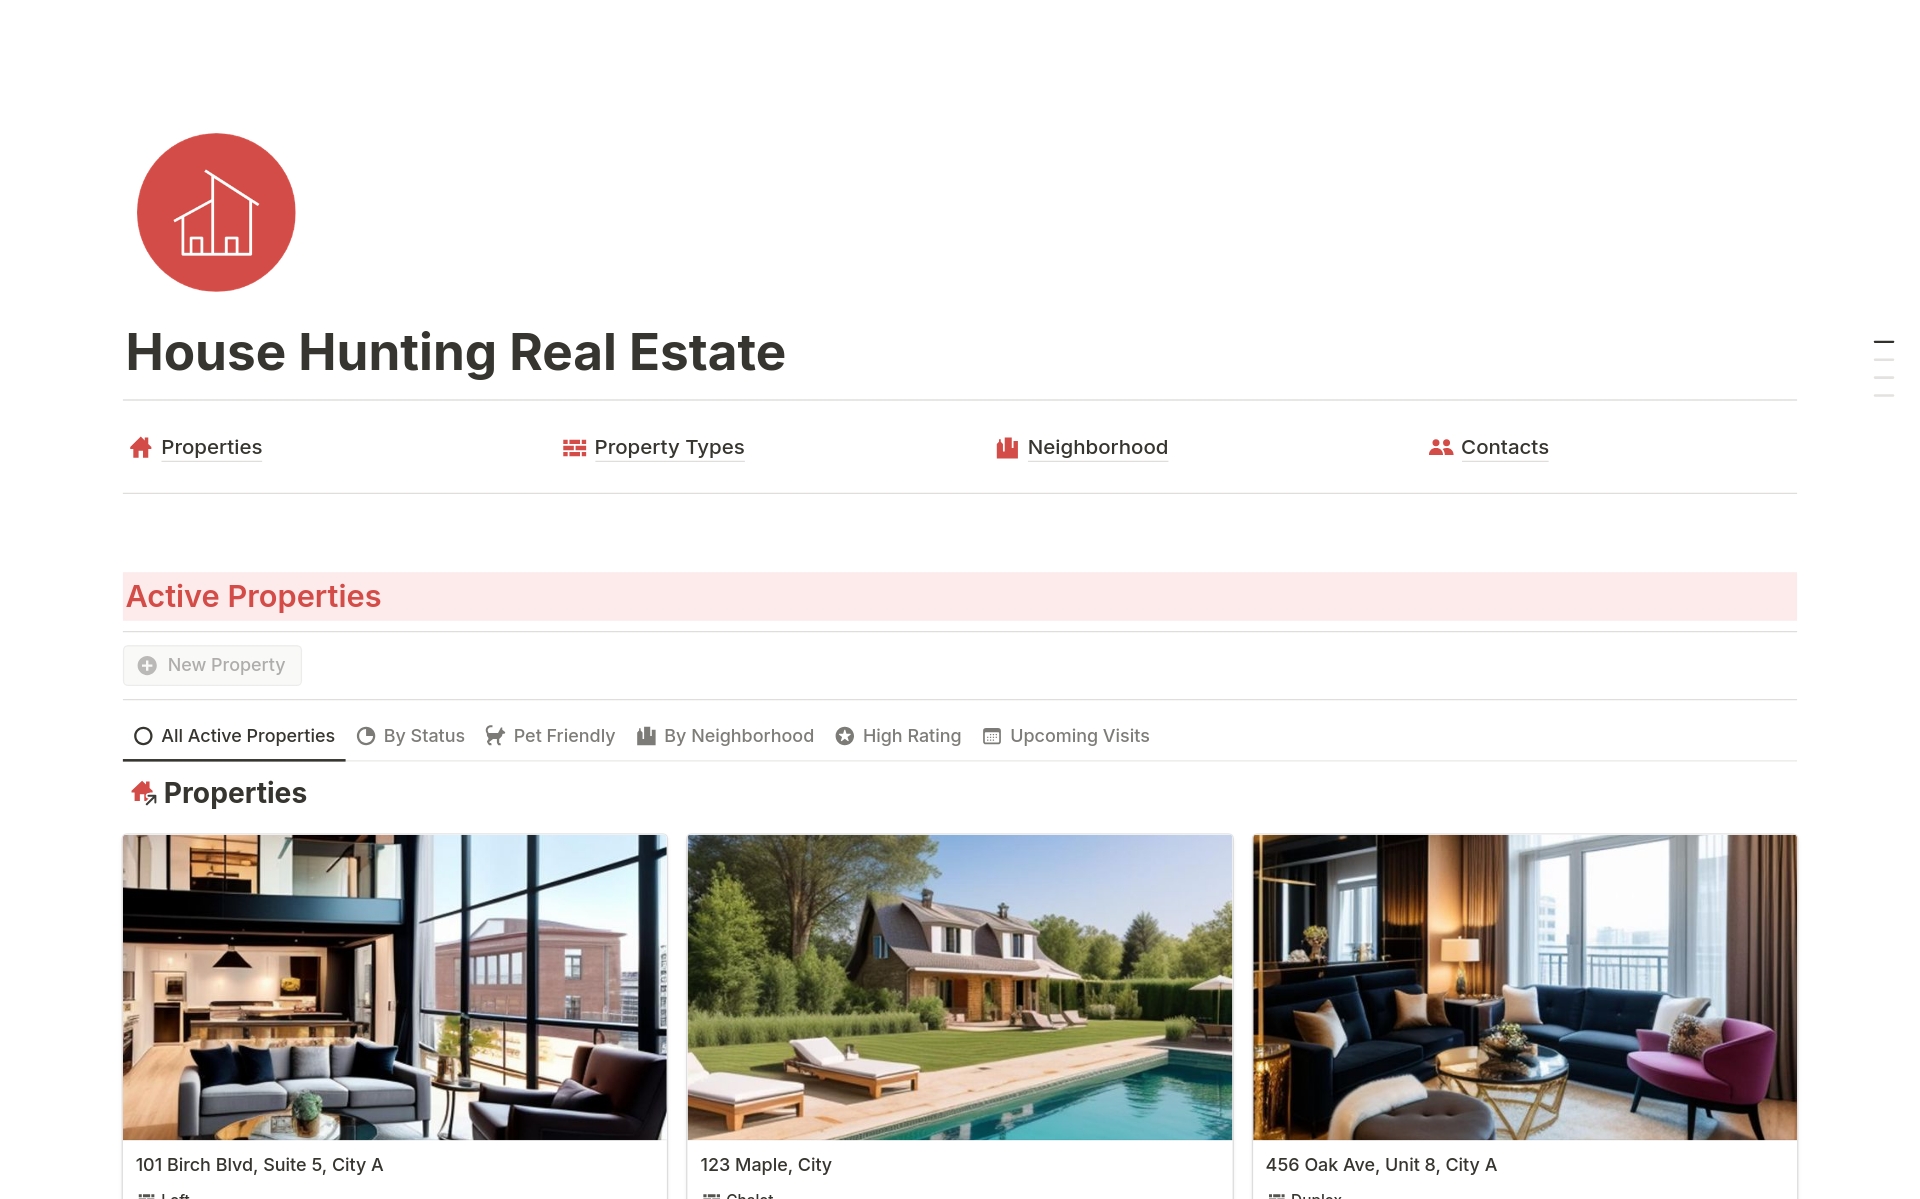 Streamline your real estate search with ease. Turn your home search into a well-organized, efficient, and stress-free experience. Designed with both real estate agents and homebuyers in mind, this template helps you keep track of every detail.